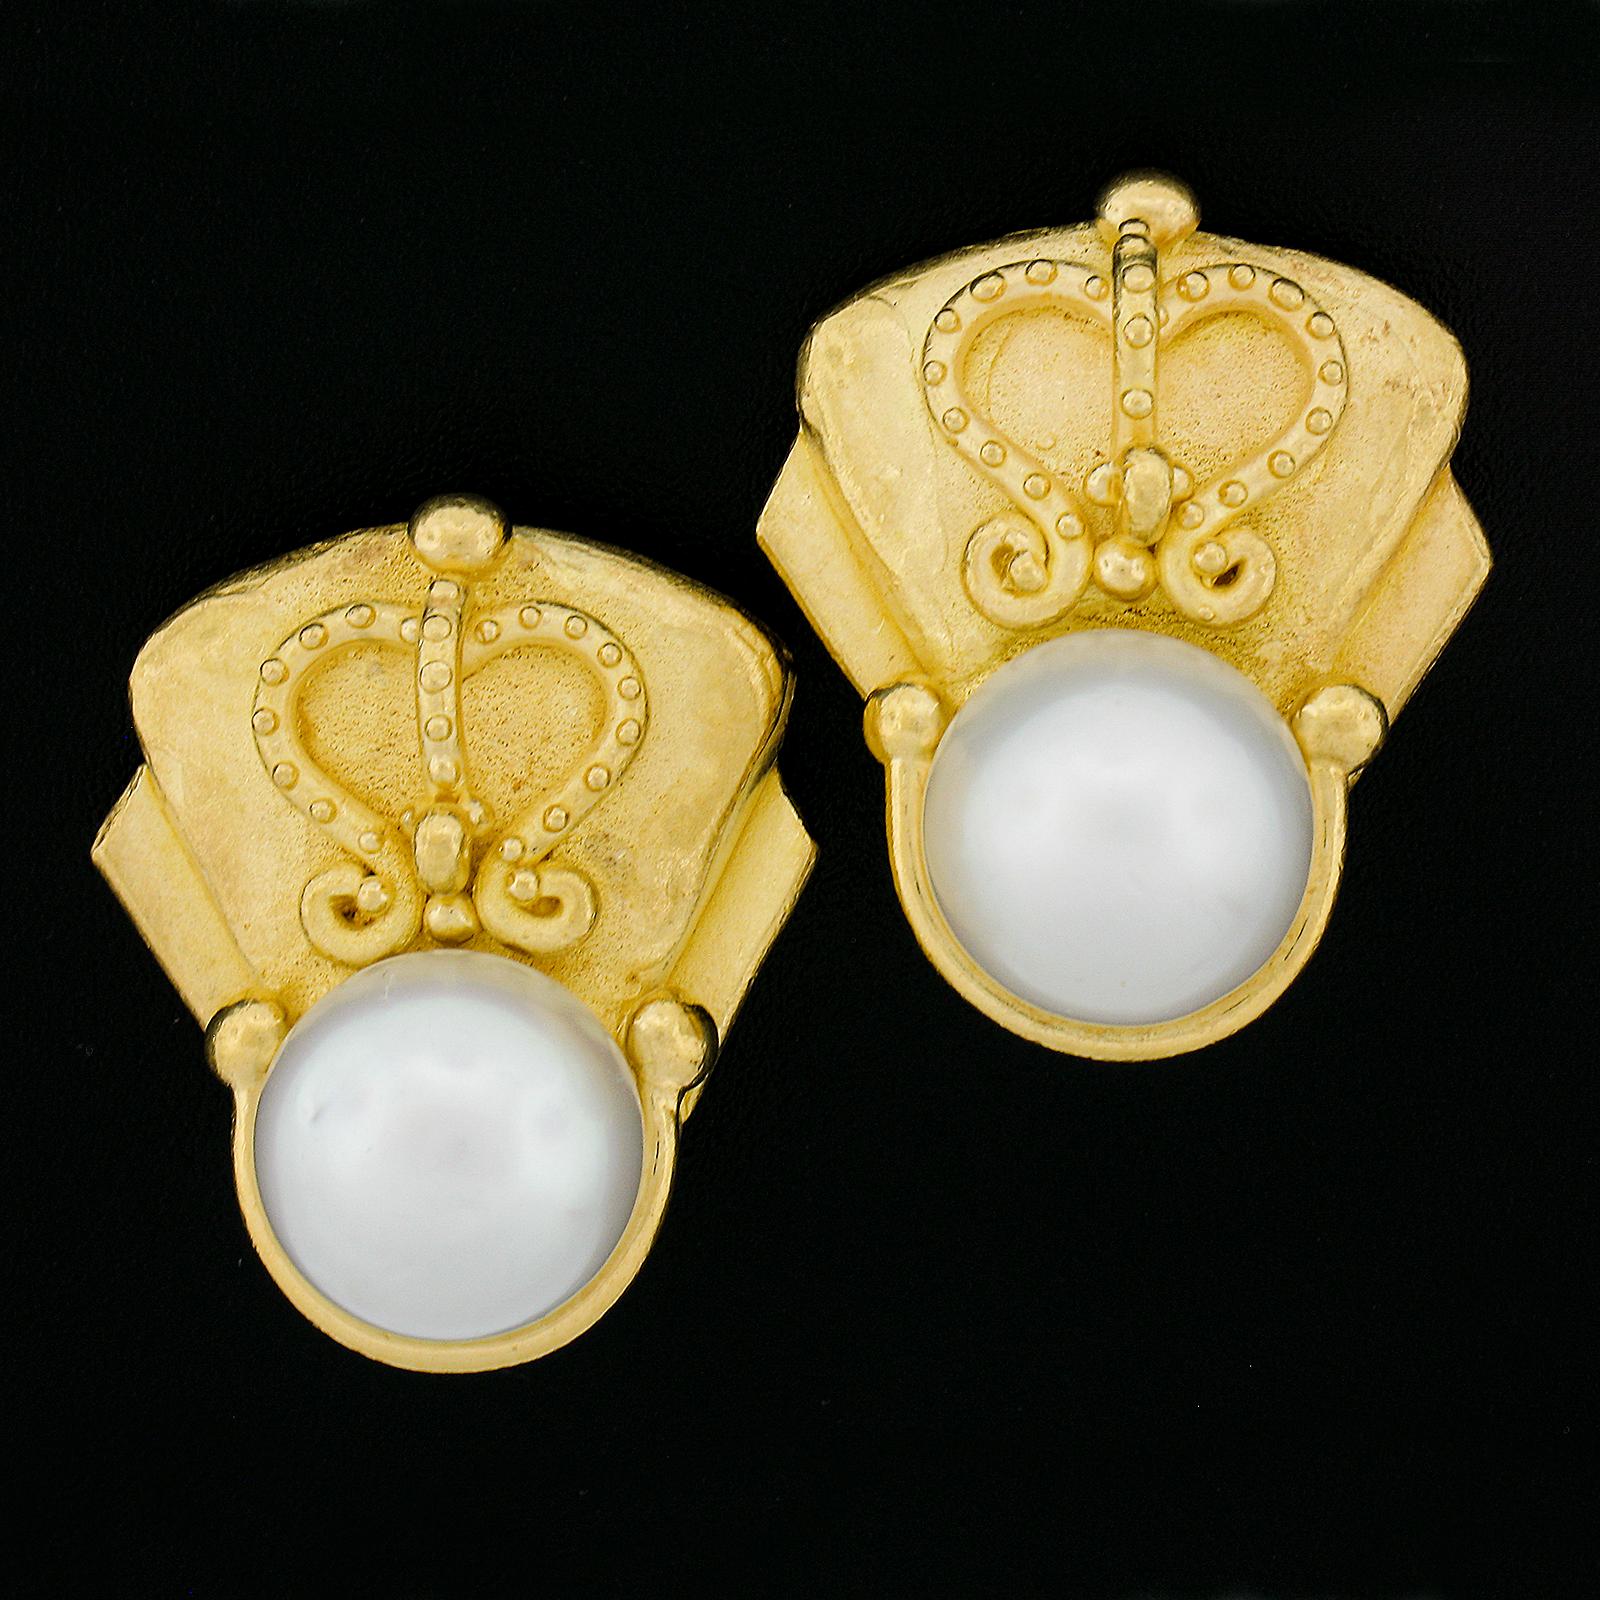 --Stone(s):--
(2) Genuine Cultured South Sea Pearls - Round Shape - White Color - Great Luster - 13.5mm each (approx.)

Material: 22K Solid Yellow Gold 
Weight: 43.39 Grams
Backing:	Clip-On Closures (Pierced ears are Not required. Posts can be added